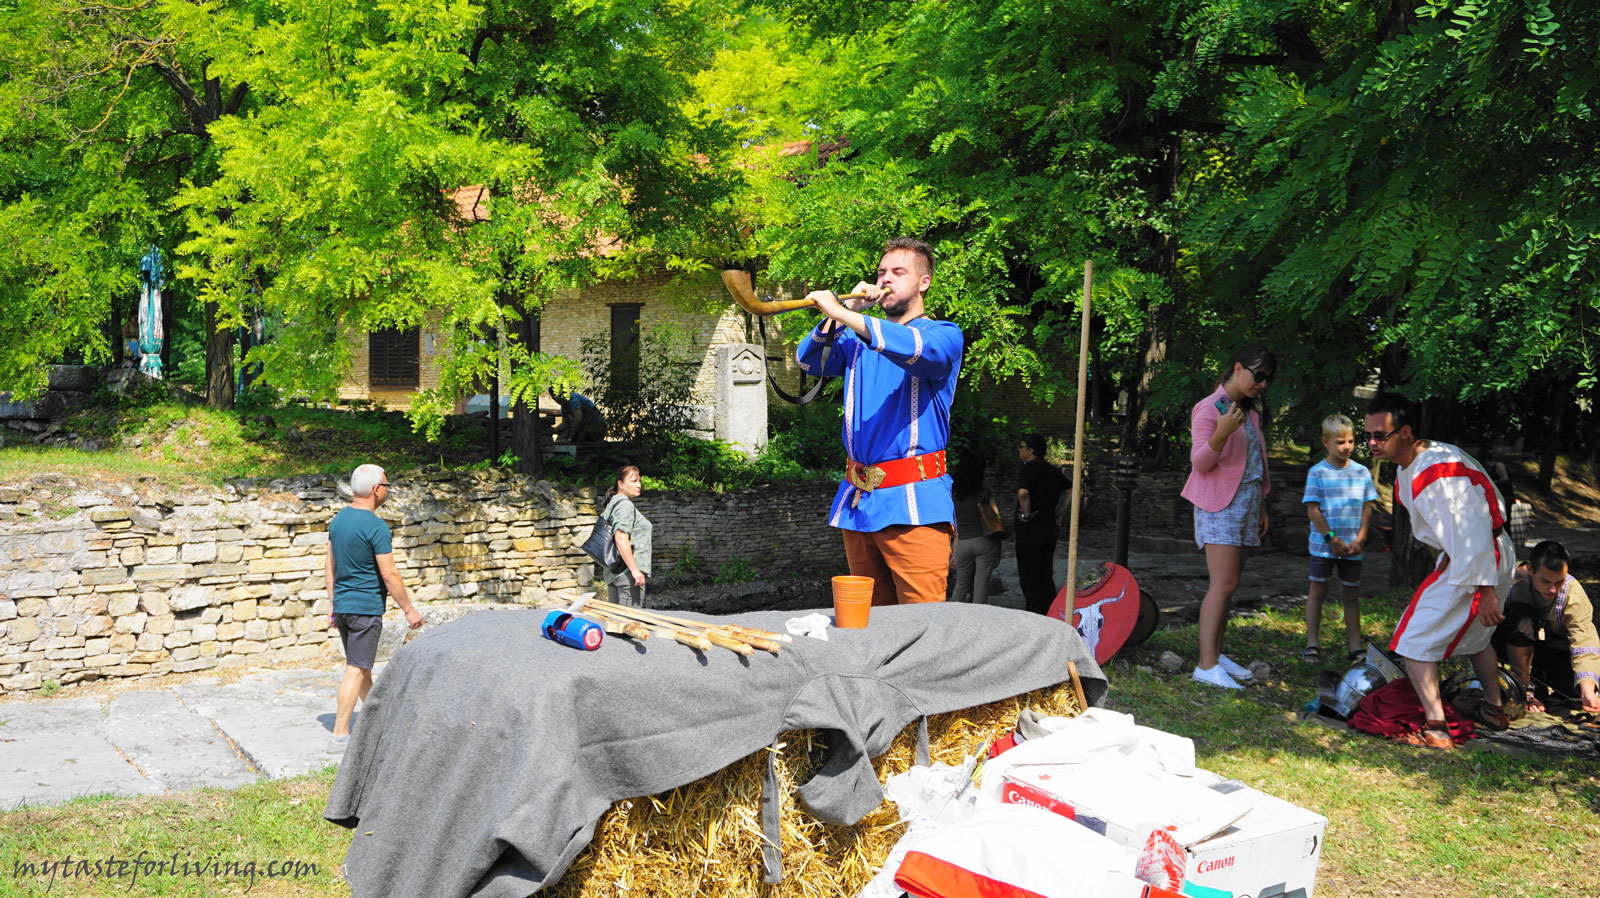 For the fourth consecutive year in Nicopolis ad Istrum was held the ancient Roman festival "Nike – The game and the victory". The festival brought back the ancient city in the epic of the Roman Empire.